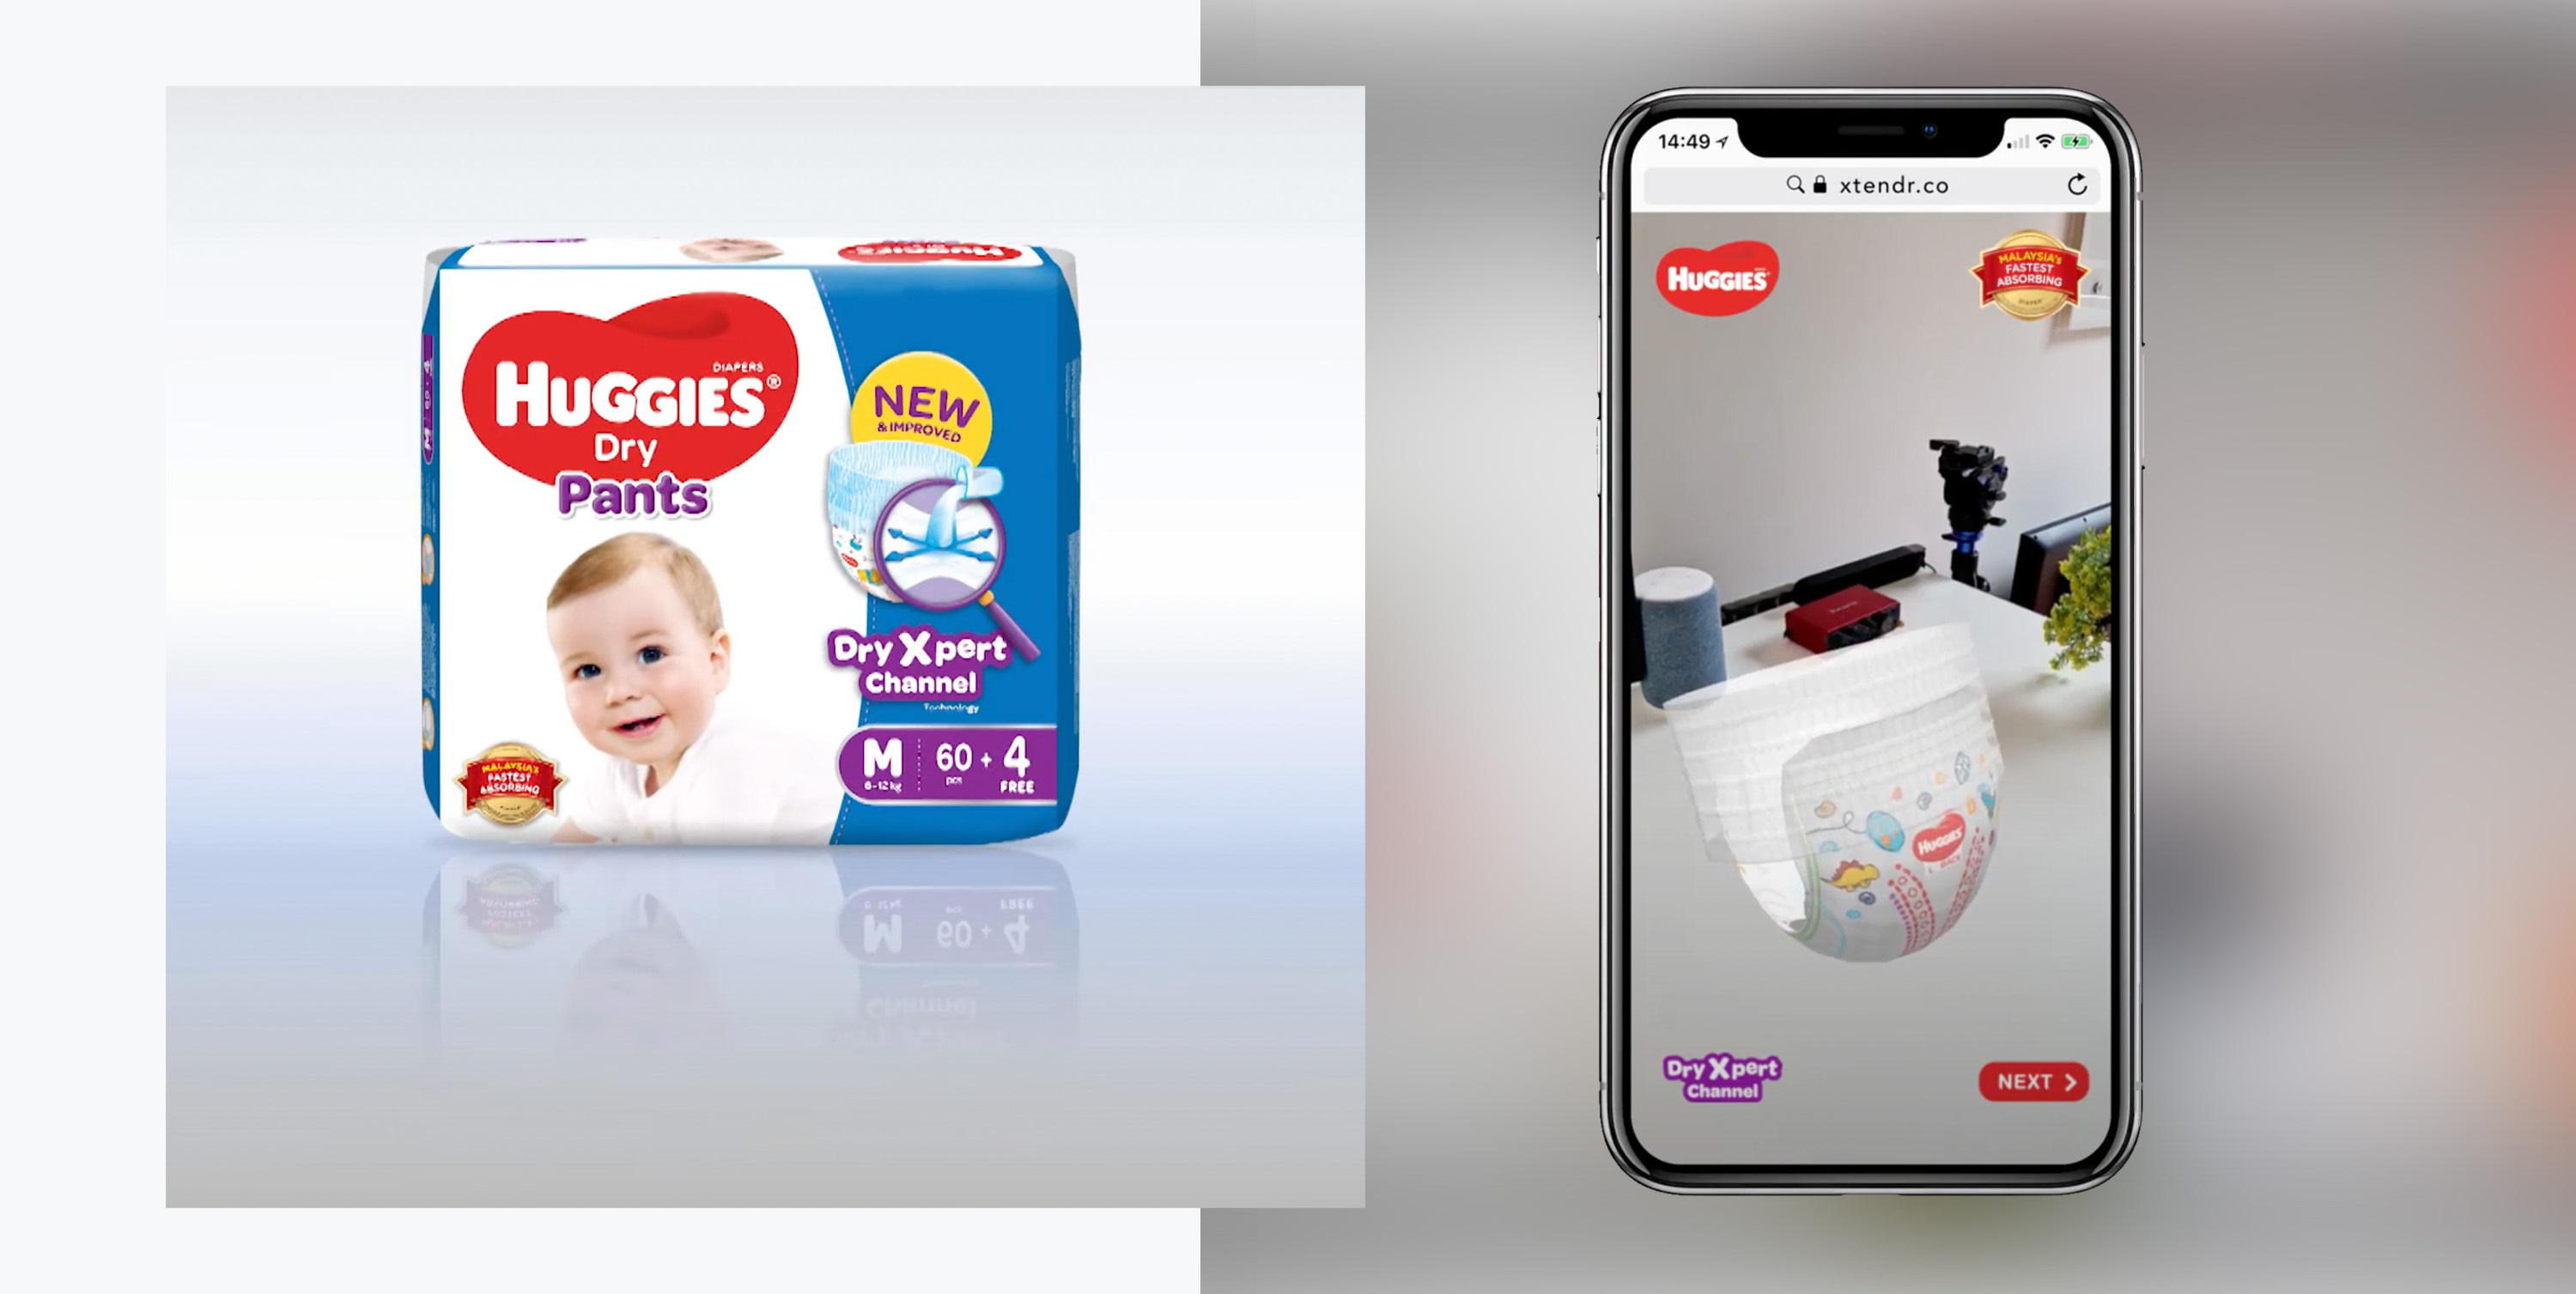 Huggies Malaysia sees massive pack scan rate and high engagement time for diaper WebAR experience